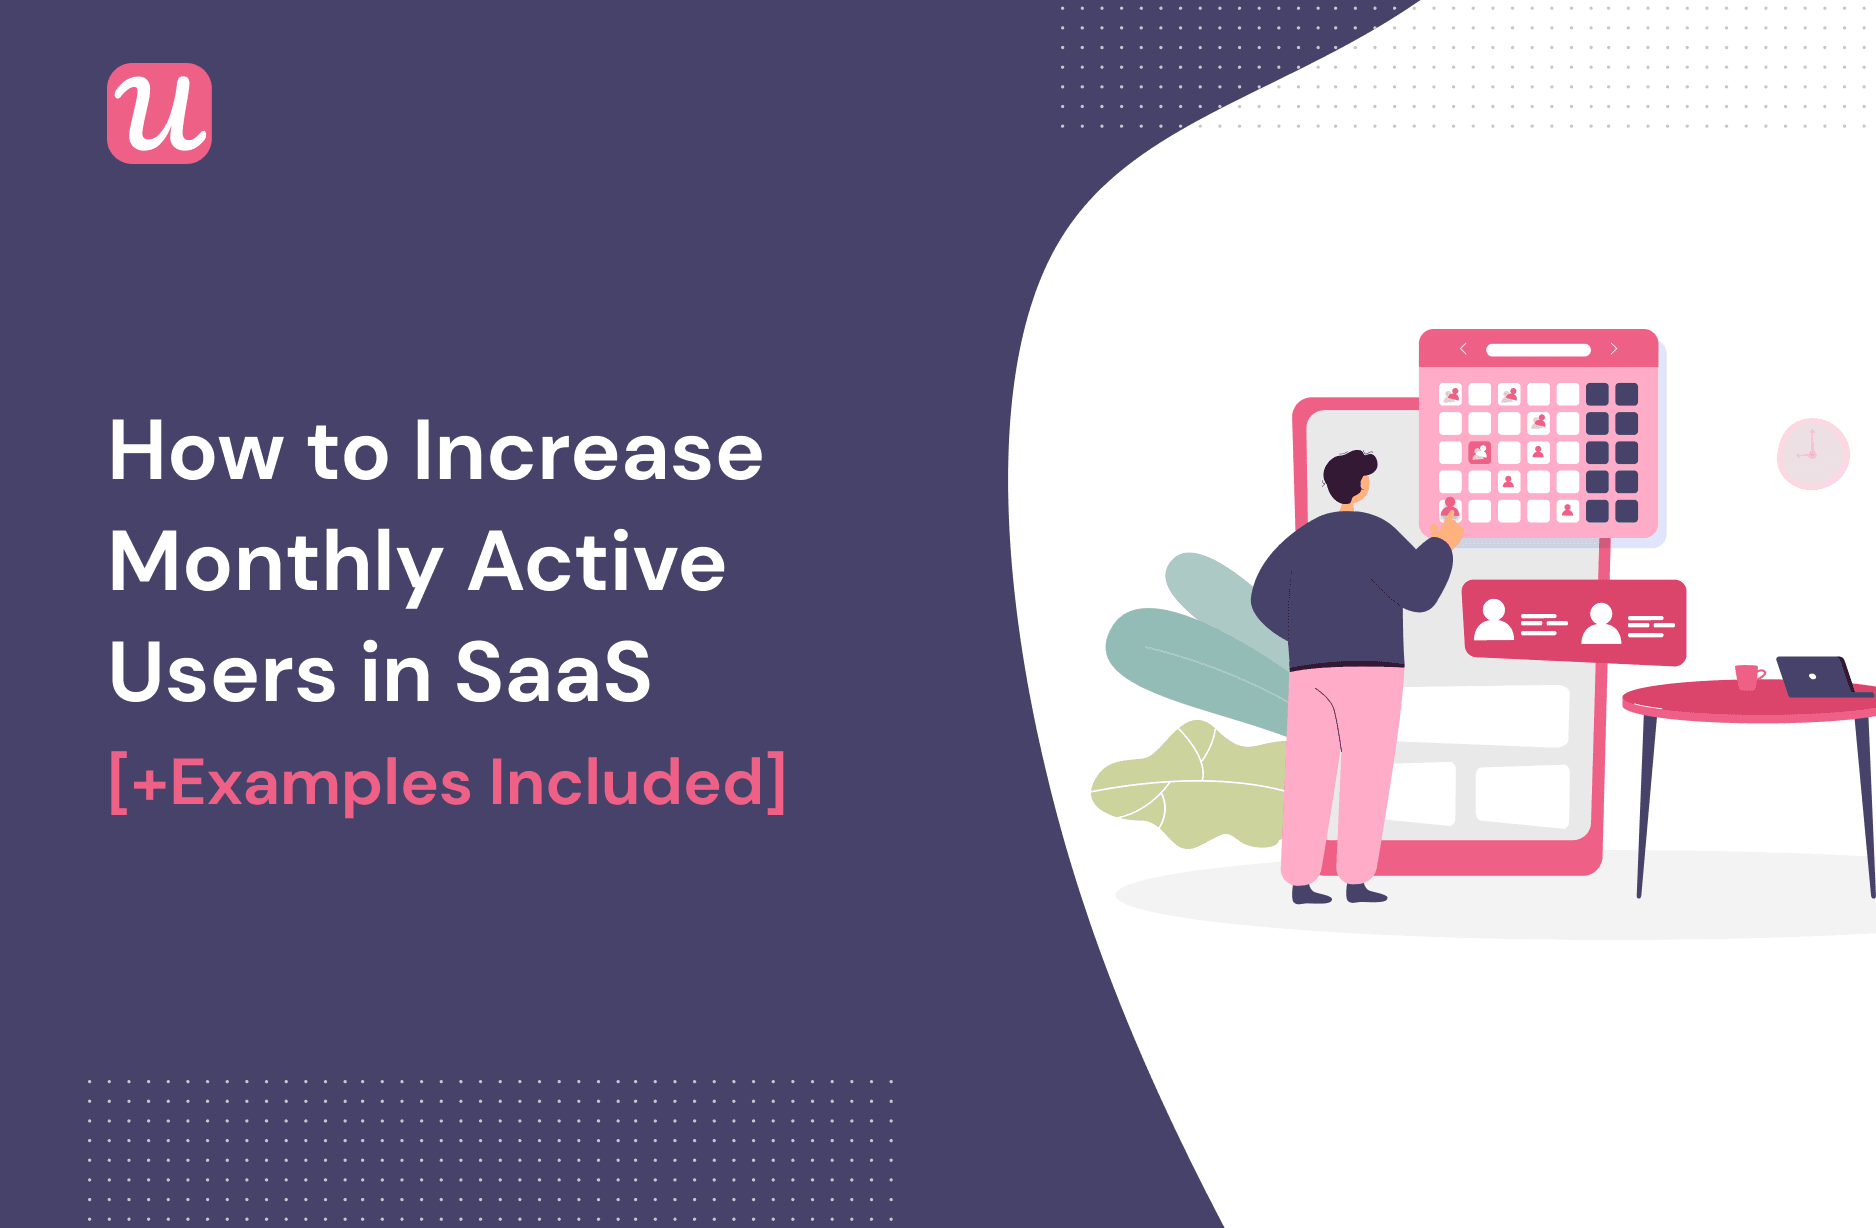 How to Increase Monthly Active Users in SaaS [+Examples Included]